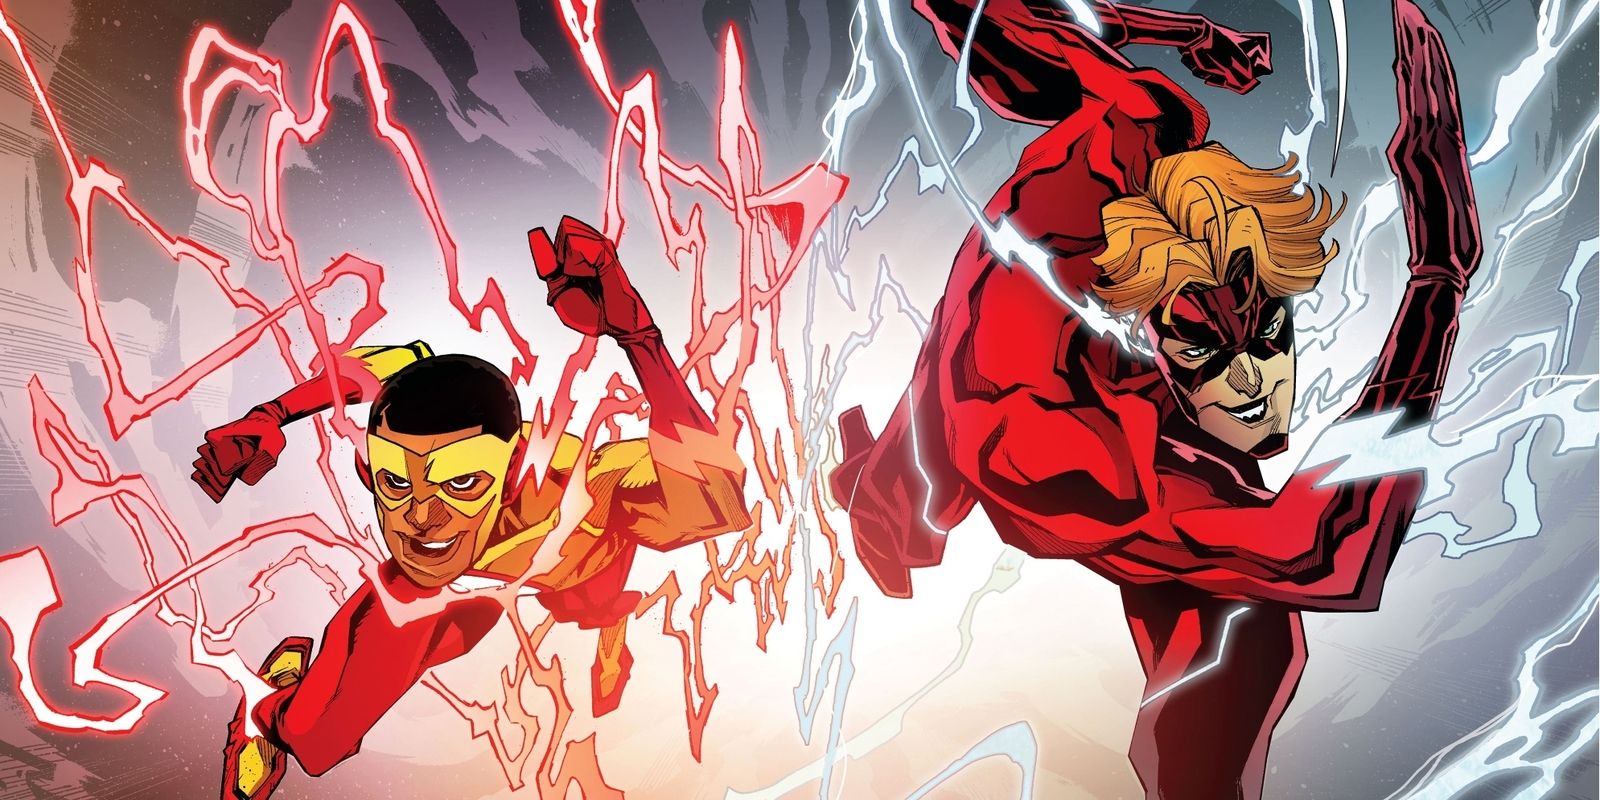 Wally West as Flash and Kid Flash from the New 52